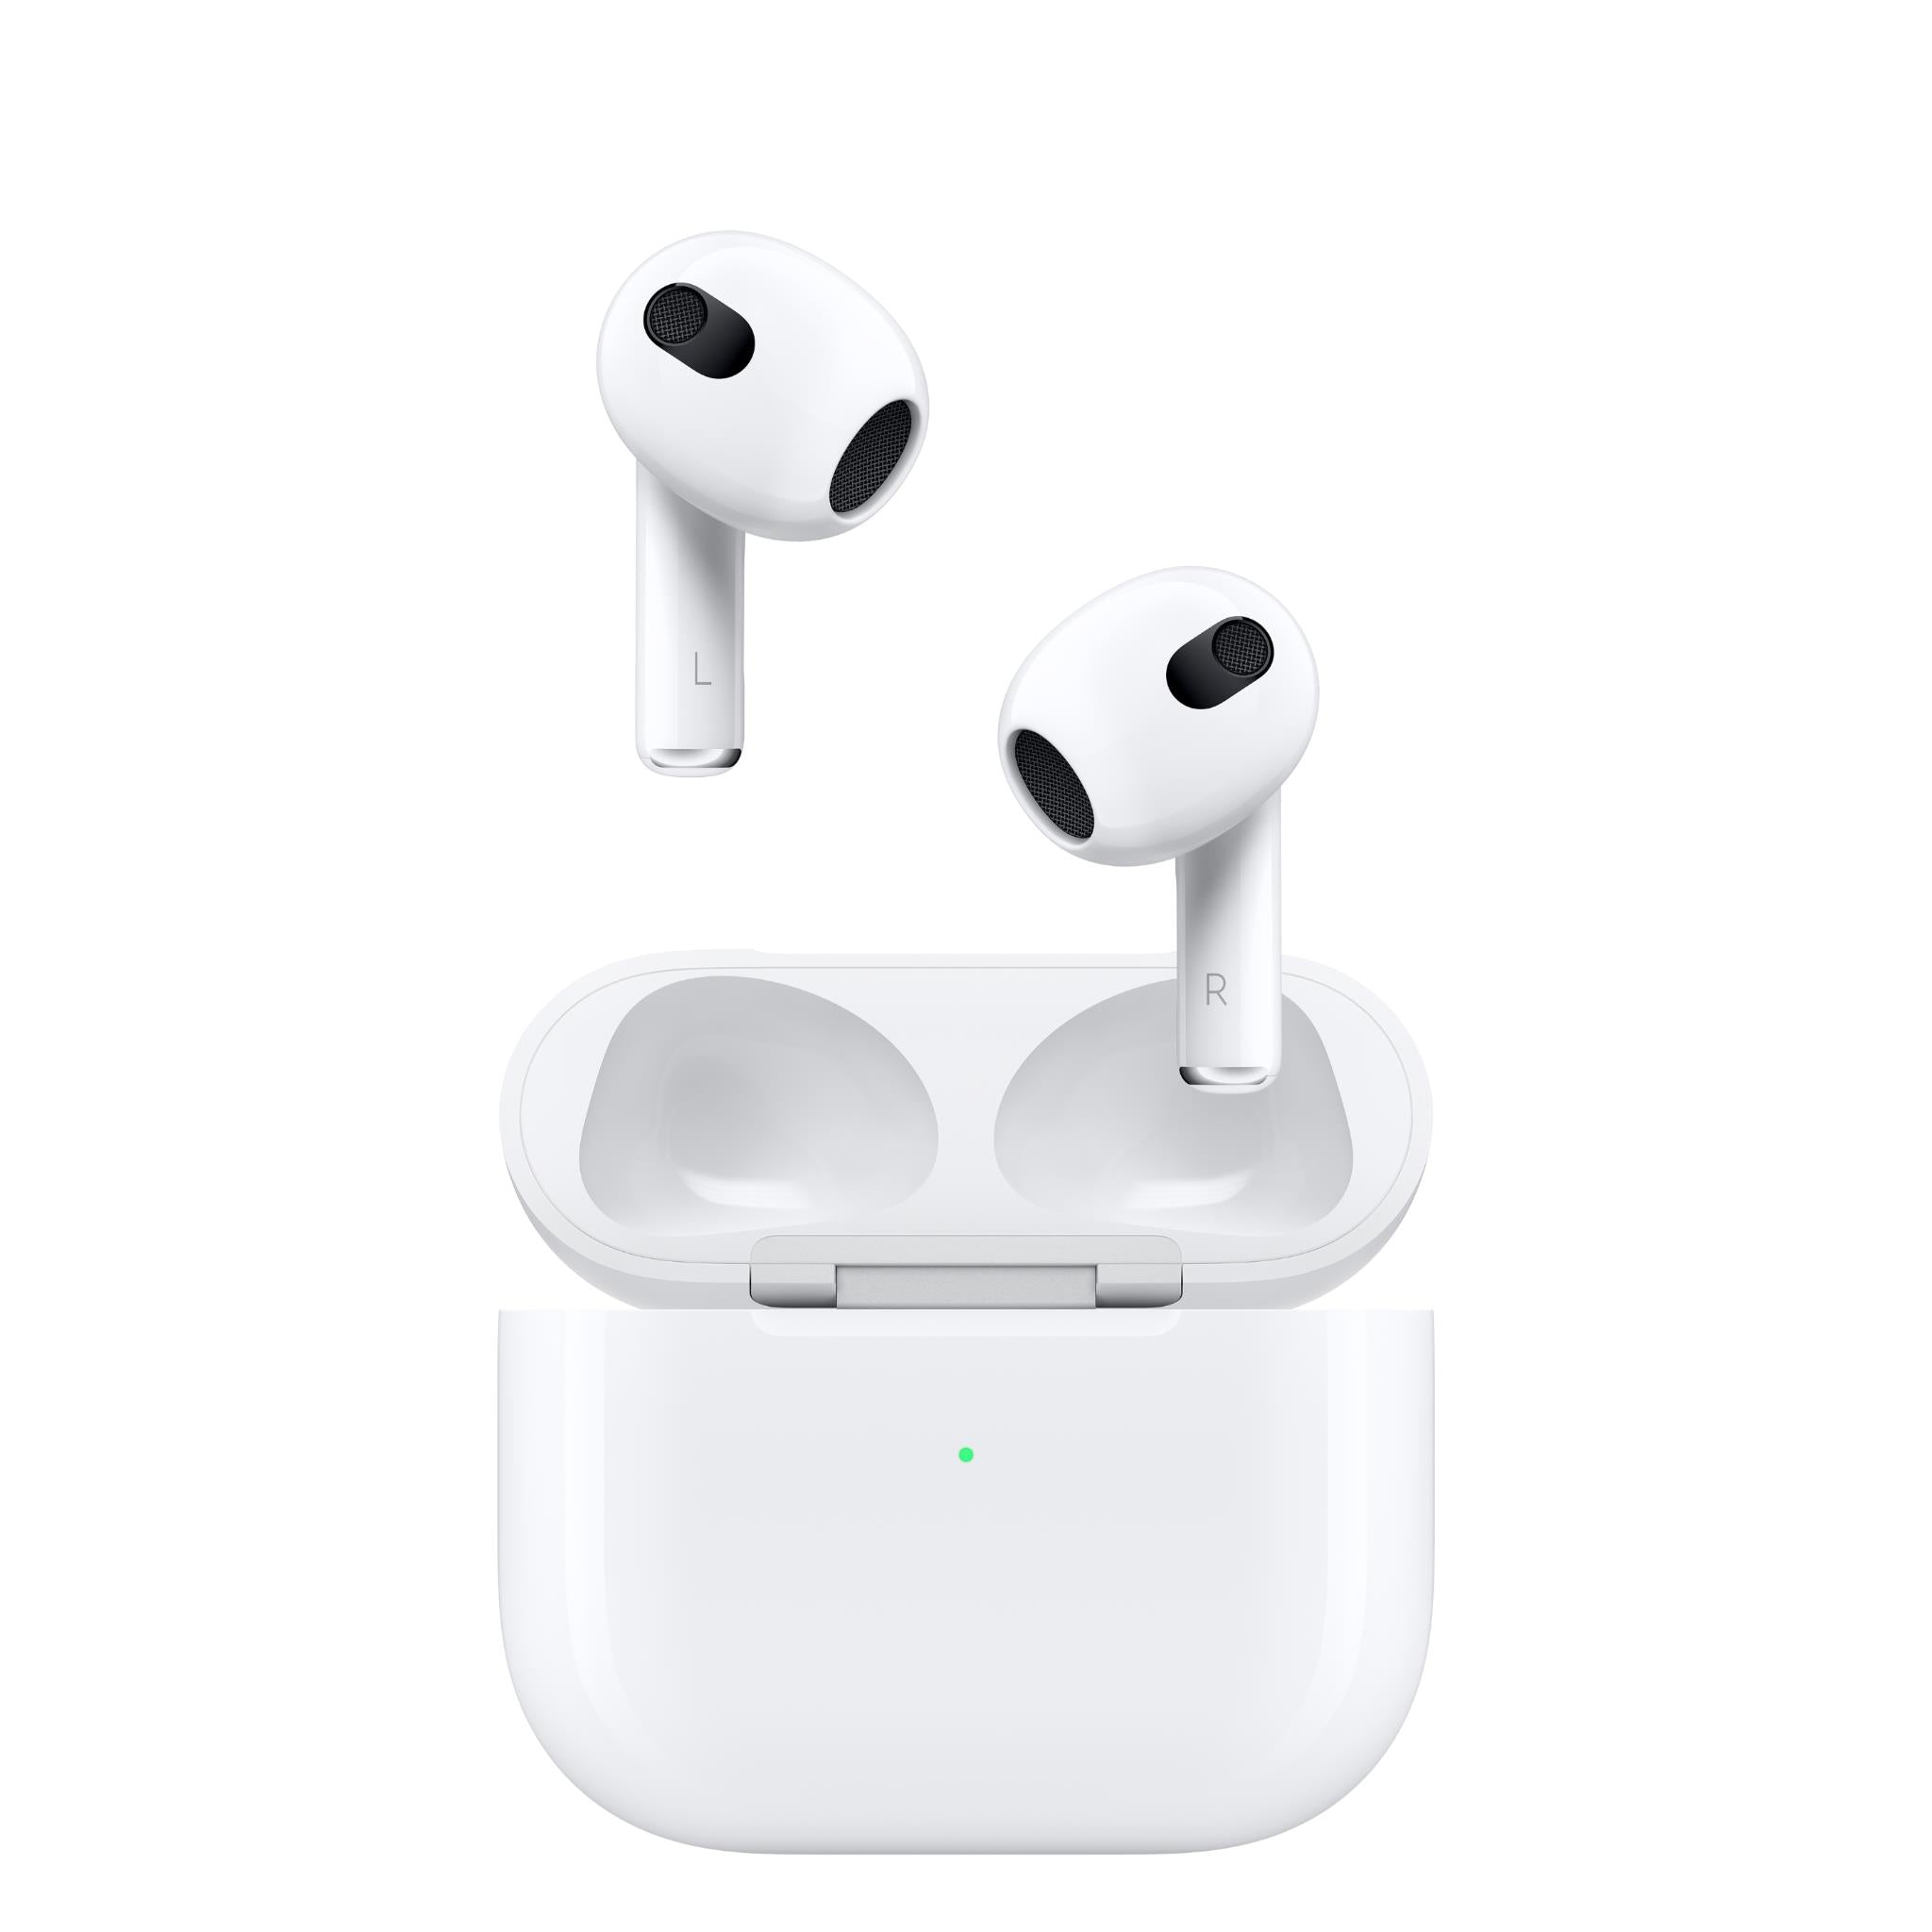 Apple AirPods review, price, specs, battery life